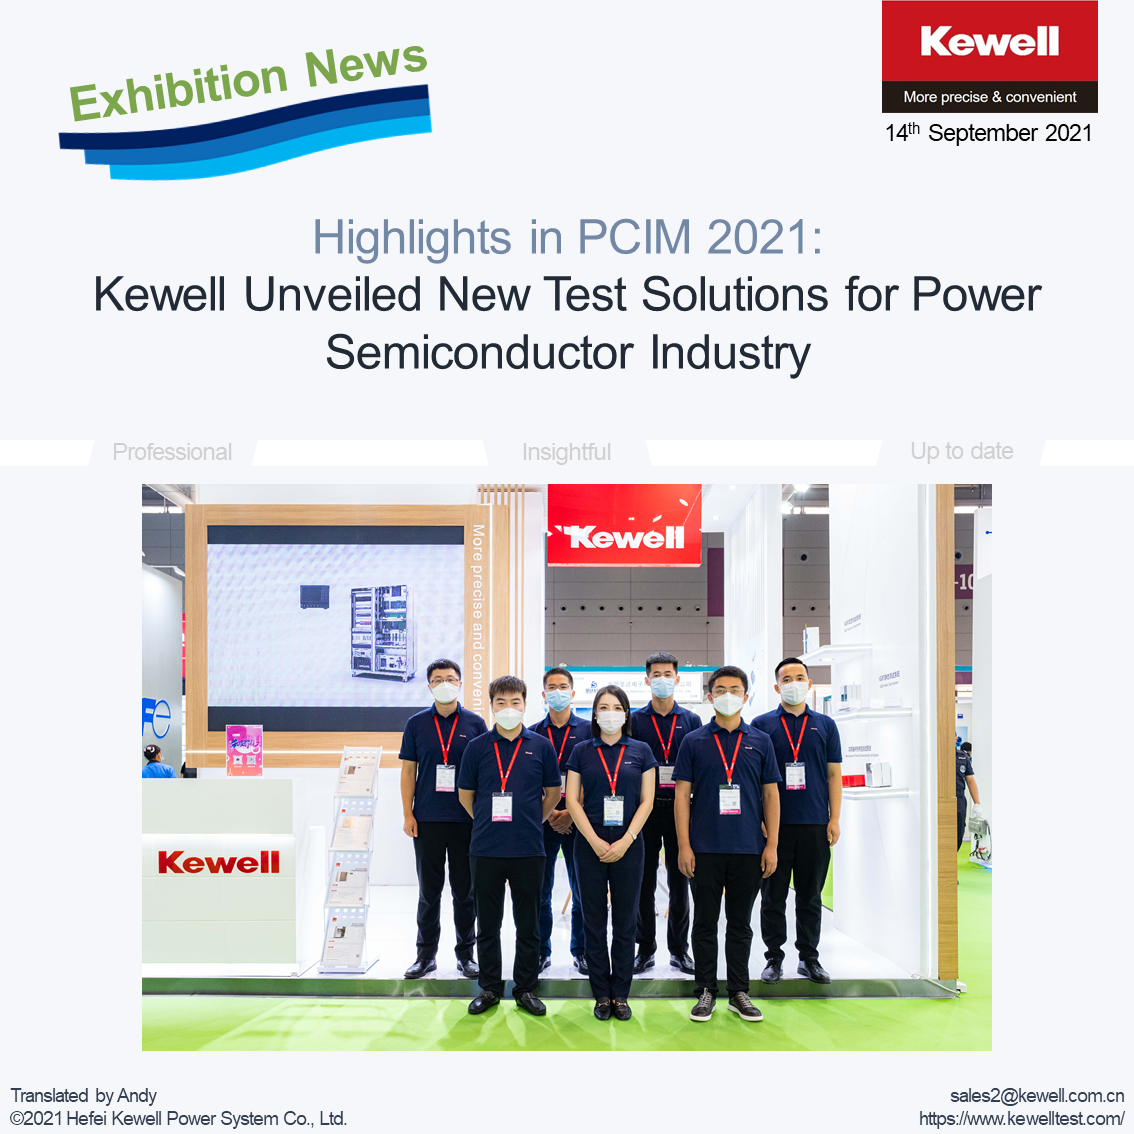 Exhibition News: Highlights in PCIM 2021 Kewell Unveiled New Test Solutions for Power Semiconductor Industry